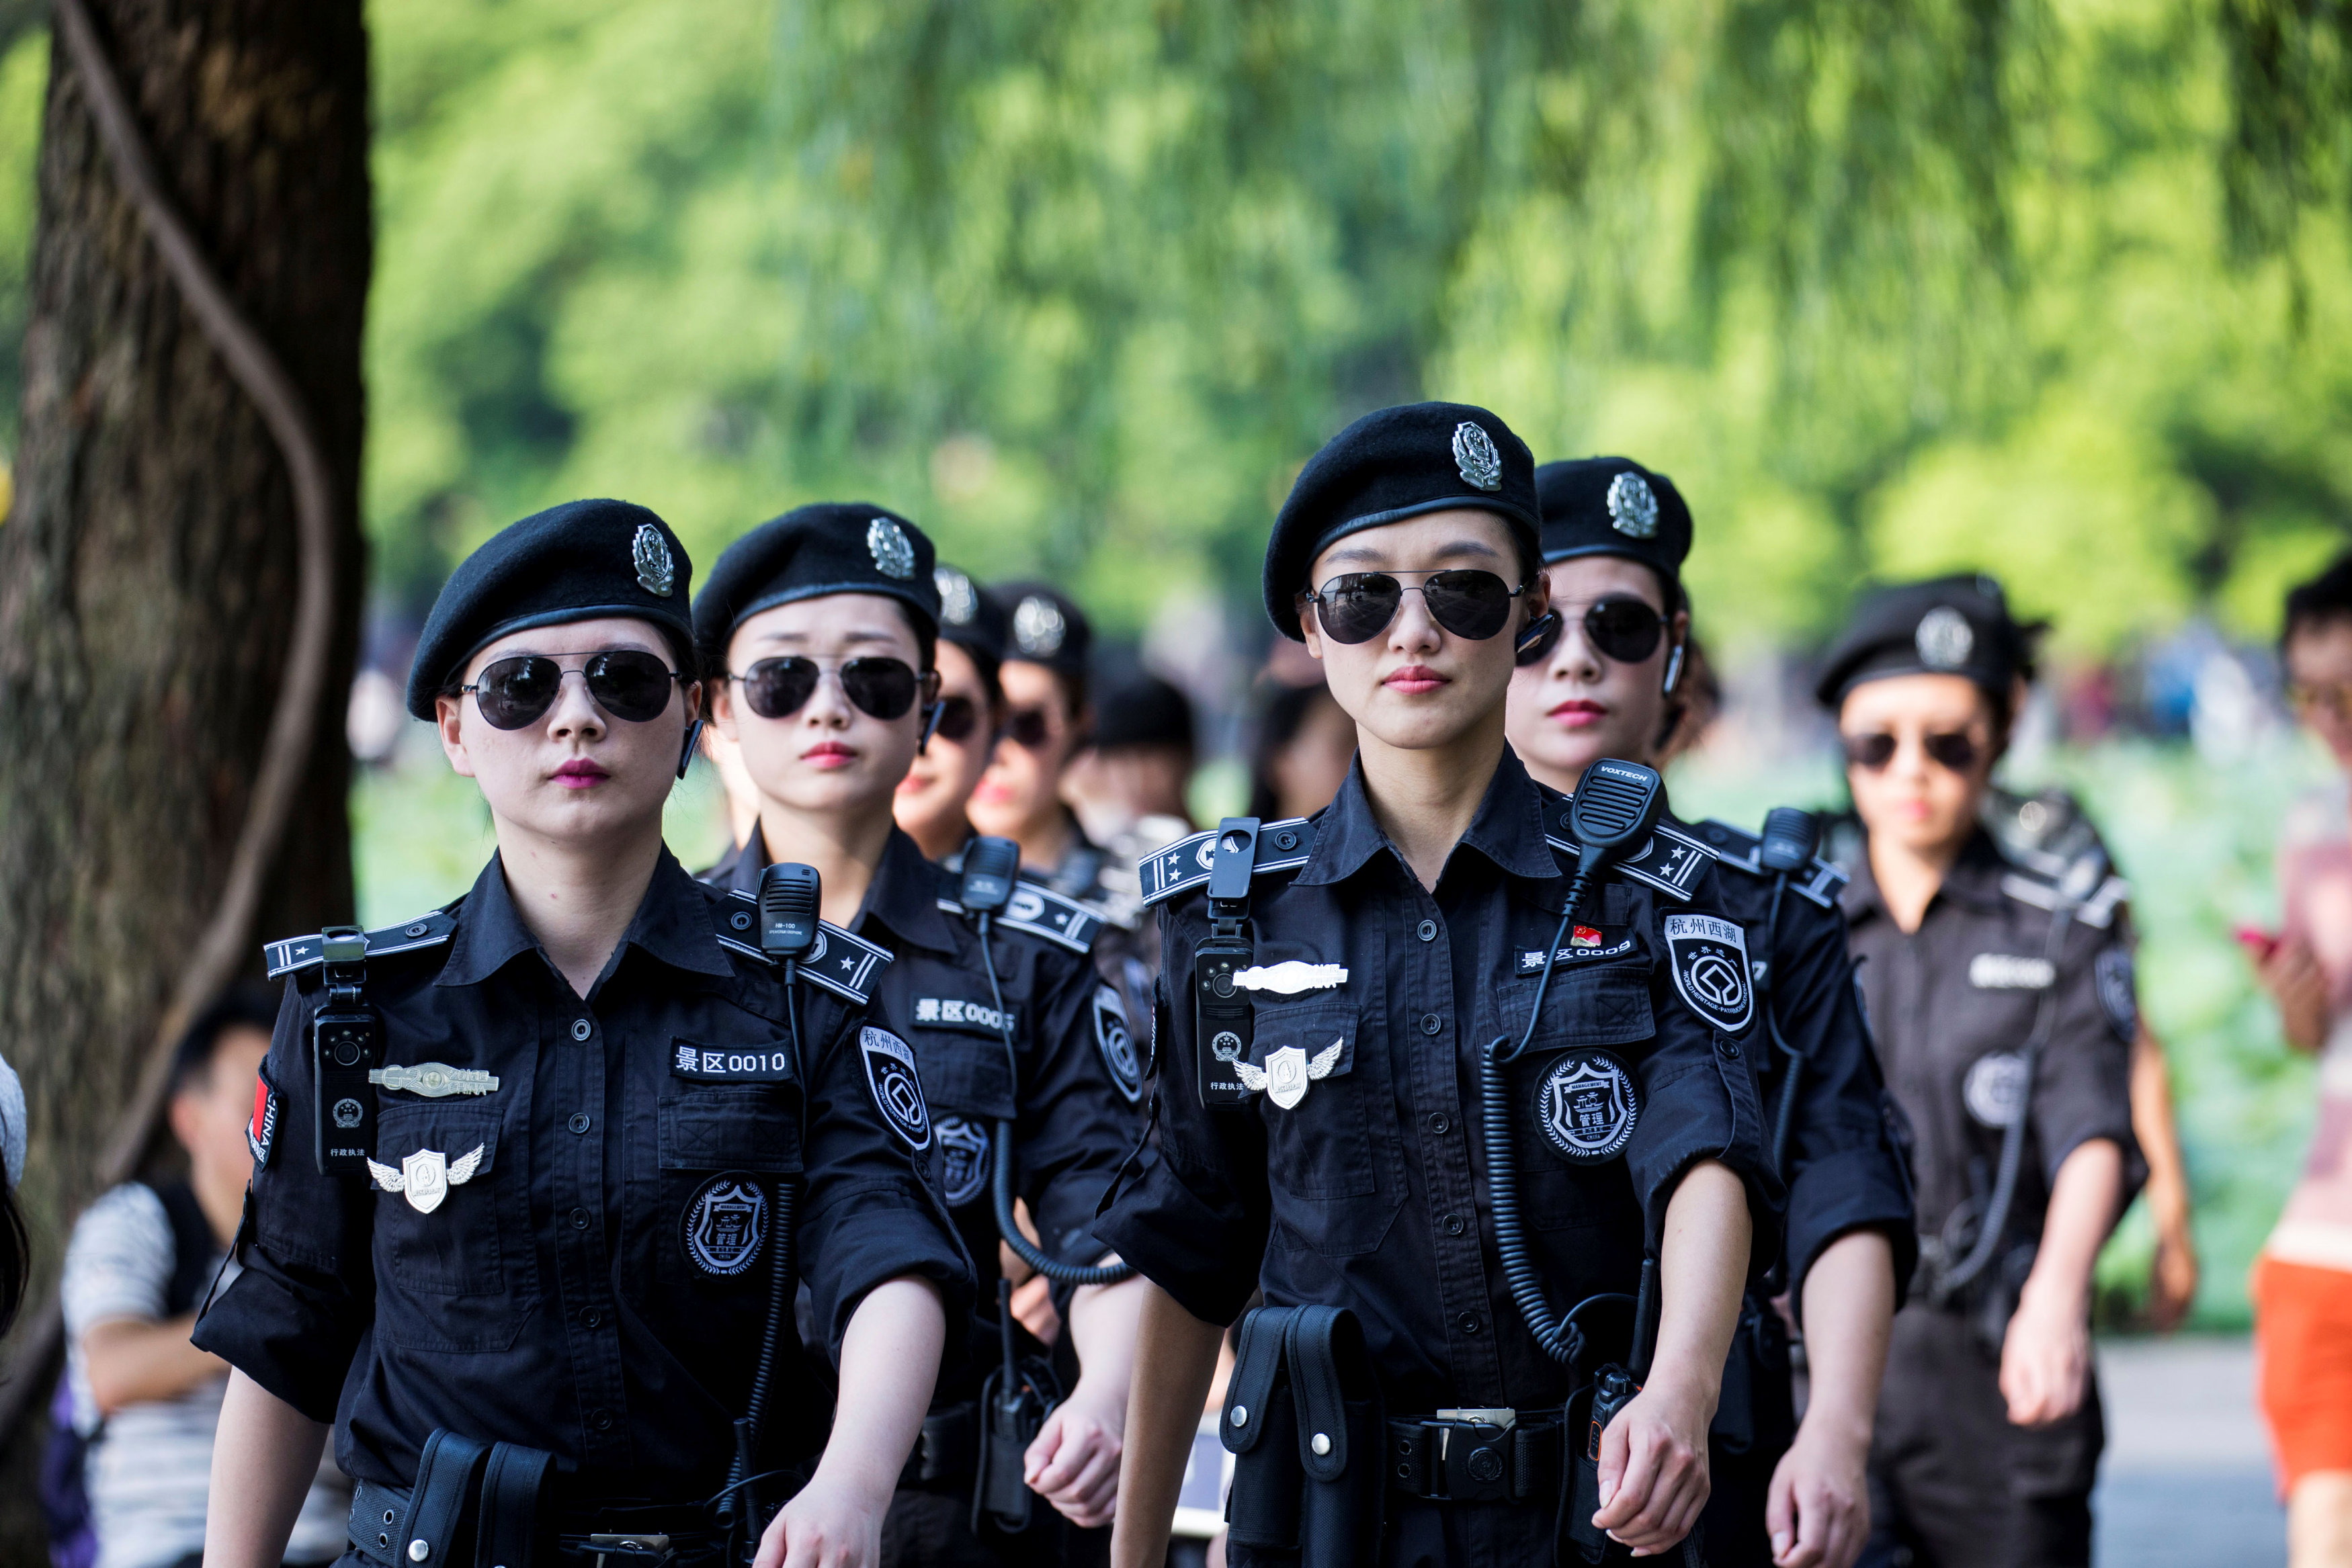 Security personnel patrol around West Lake in Hangzhou, Zhejiang Province, China, August 31, 2016. Picture taken August 31, 2016. REUTERS/Stringer ATTENTION EDITORS - THIS IMAGE WAS PROVIDED BY A THIRD PARTY. EDITORIAL USE ONLY. CHINA OUT. NO COMMERCIAL O